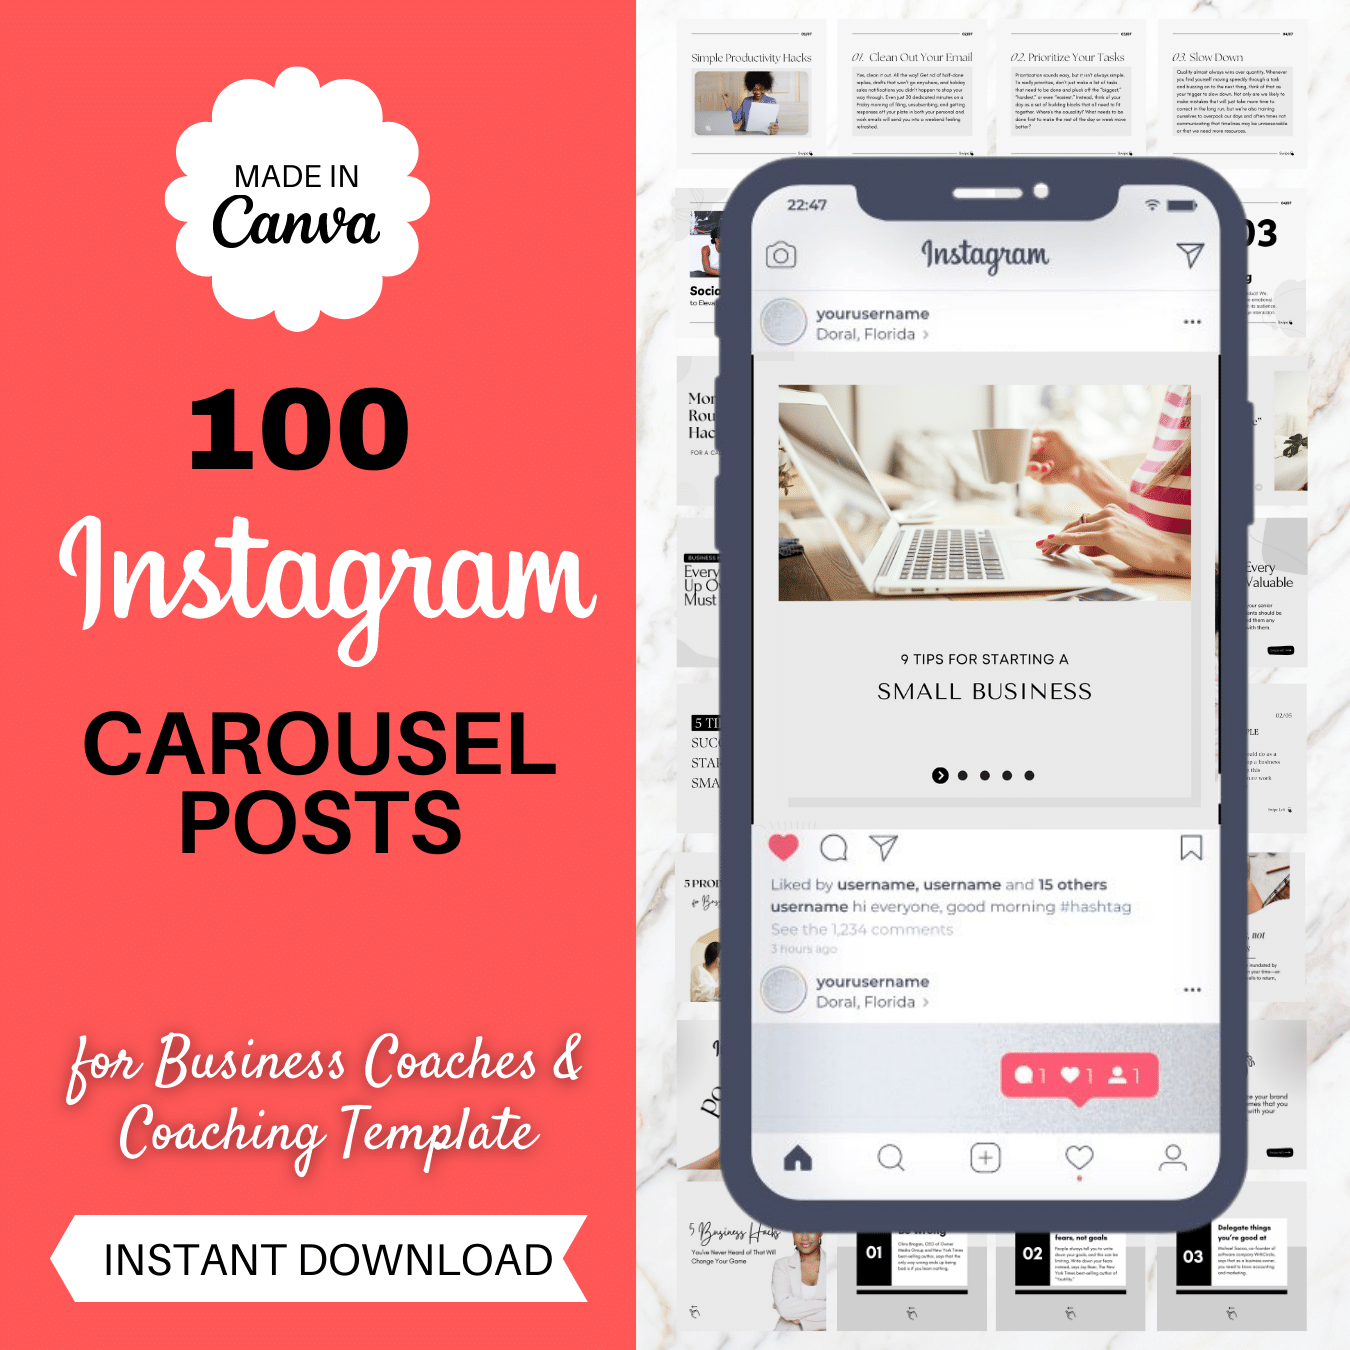 100 Instagram Carousel Posts Canva for Business Coaches & Coaching Template100 Instagram Carousel Posts Canva for Business Coaches & Coaching Template